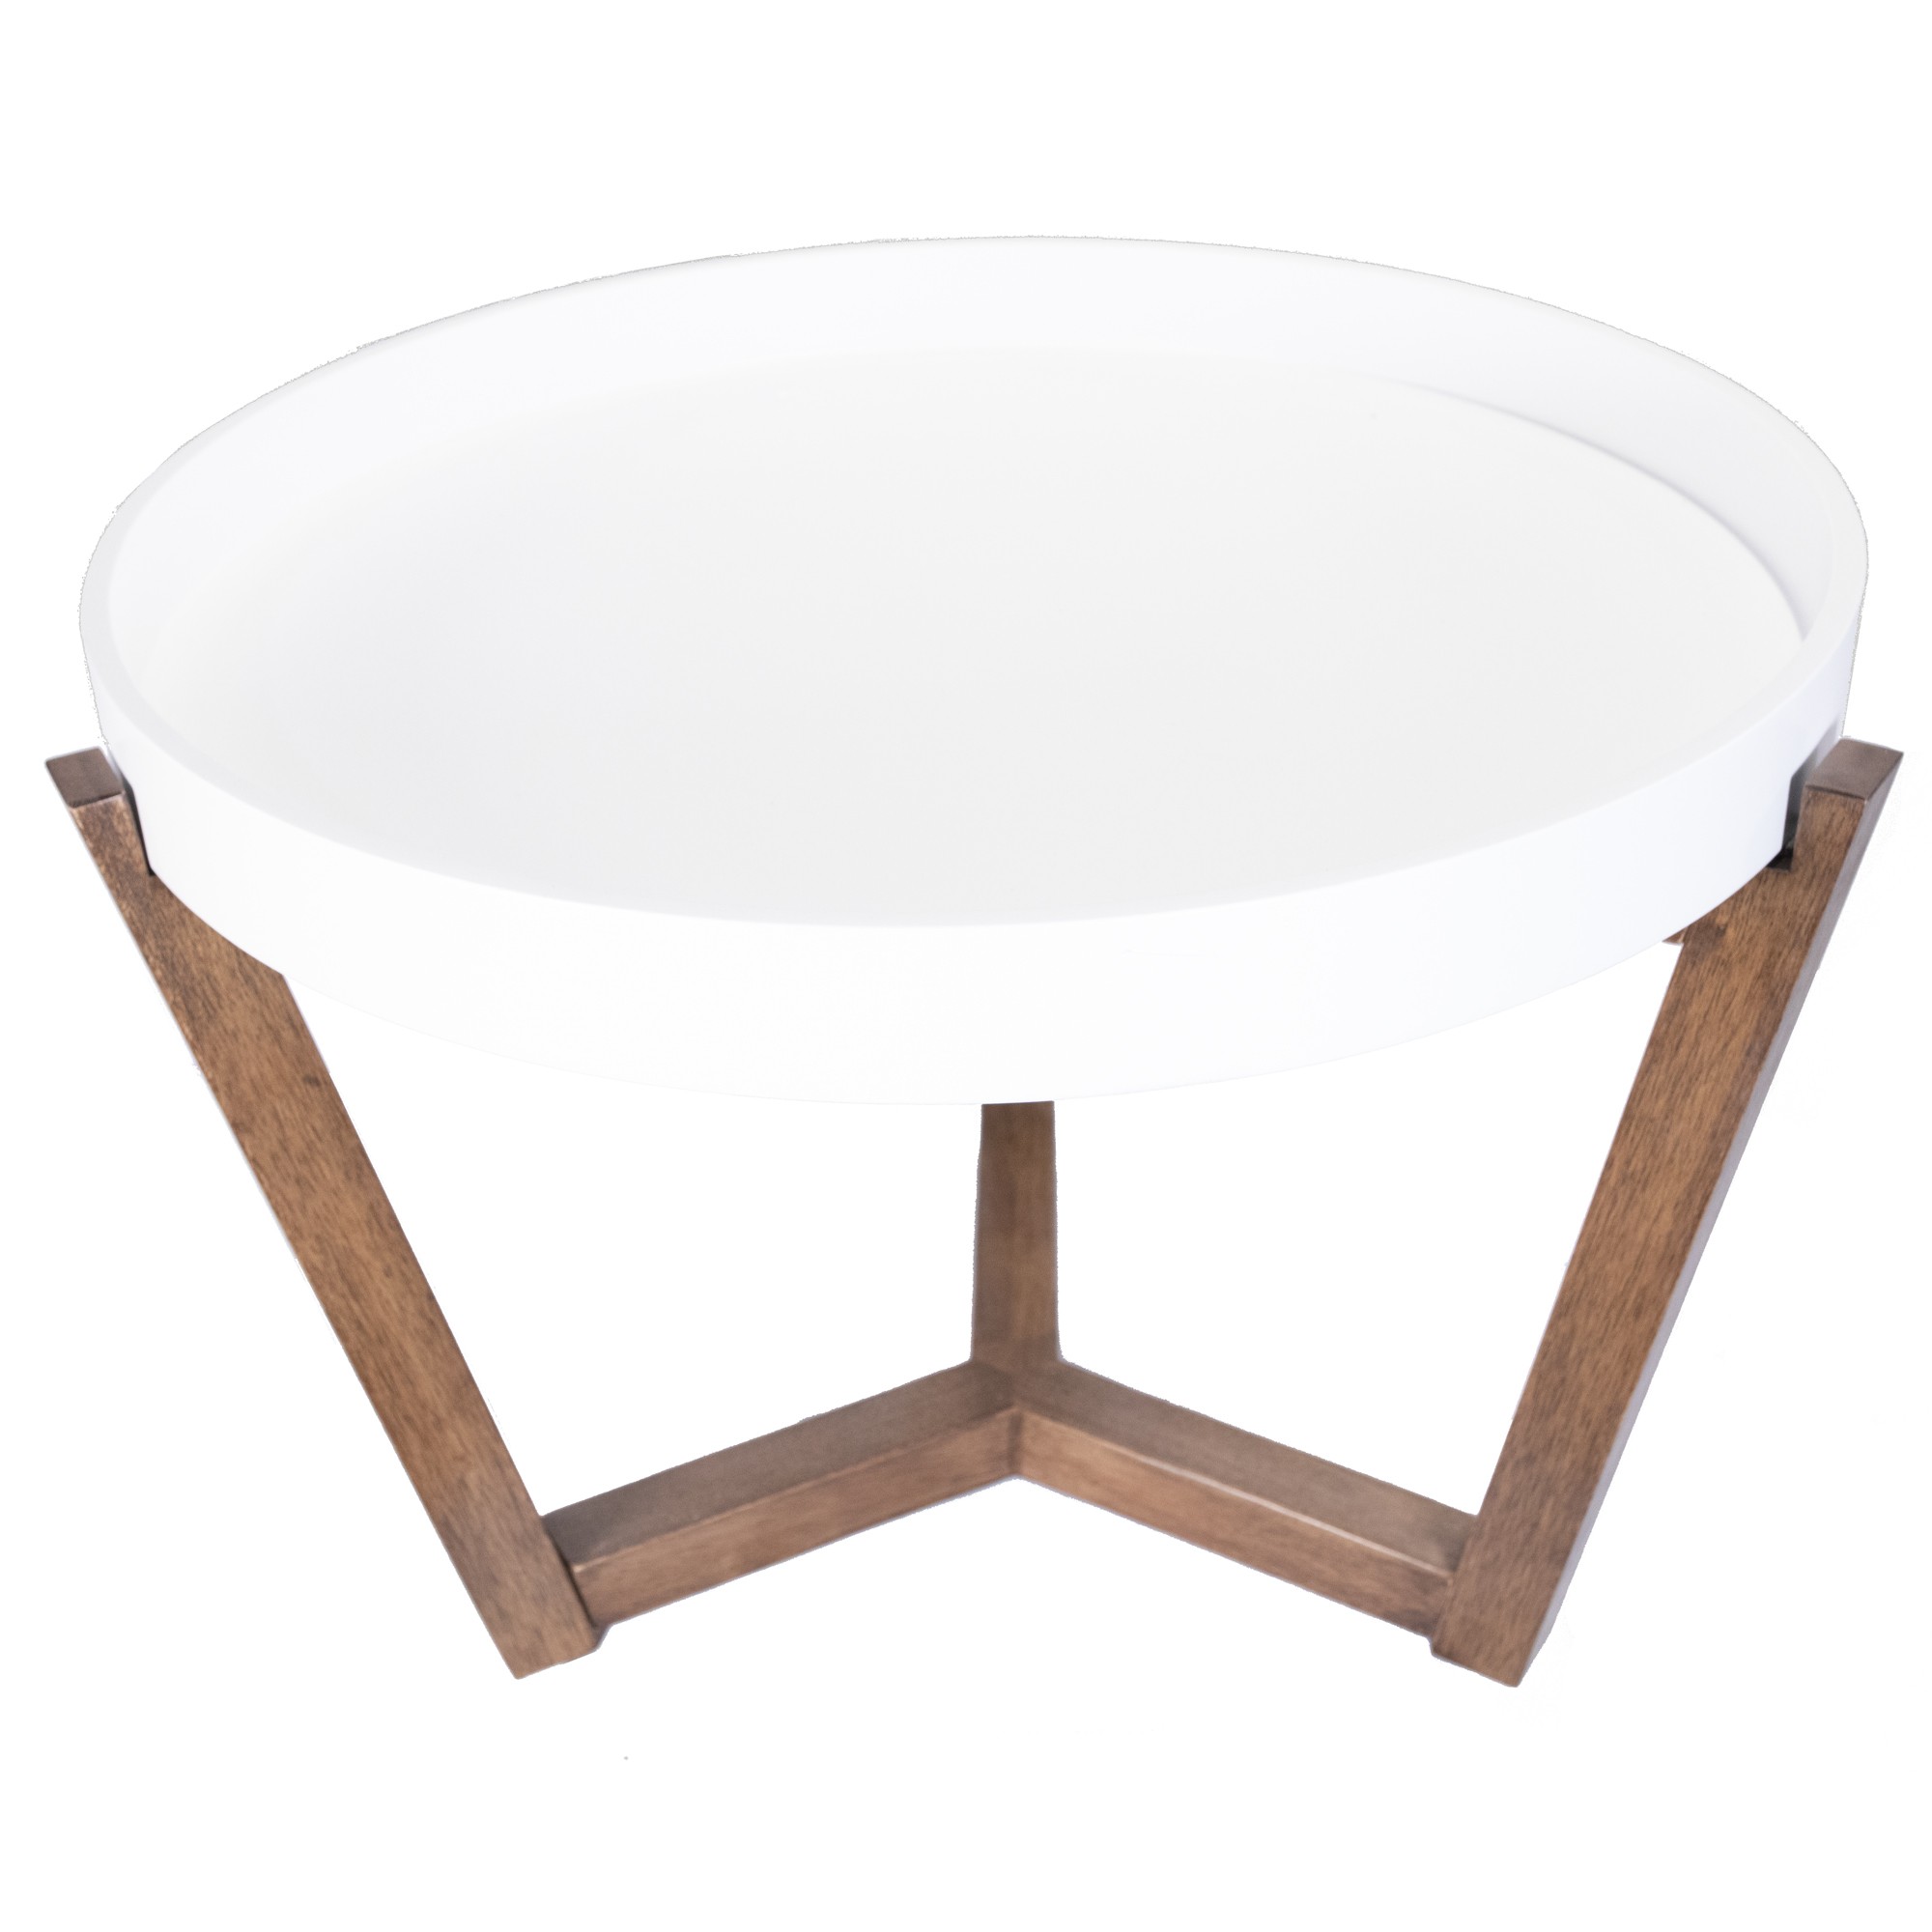 22" X 22" X 16" White & Mocha Solid Wood Round Table